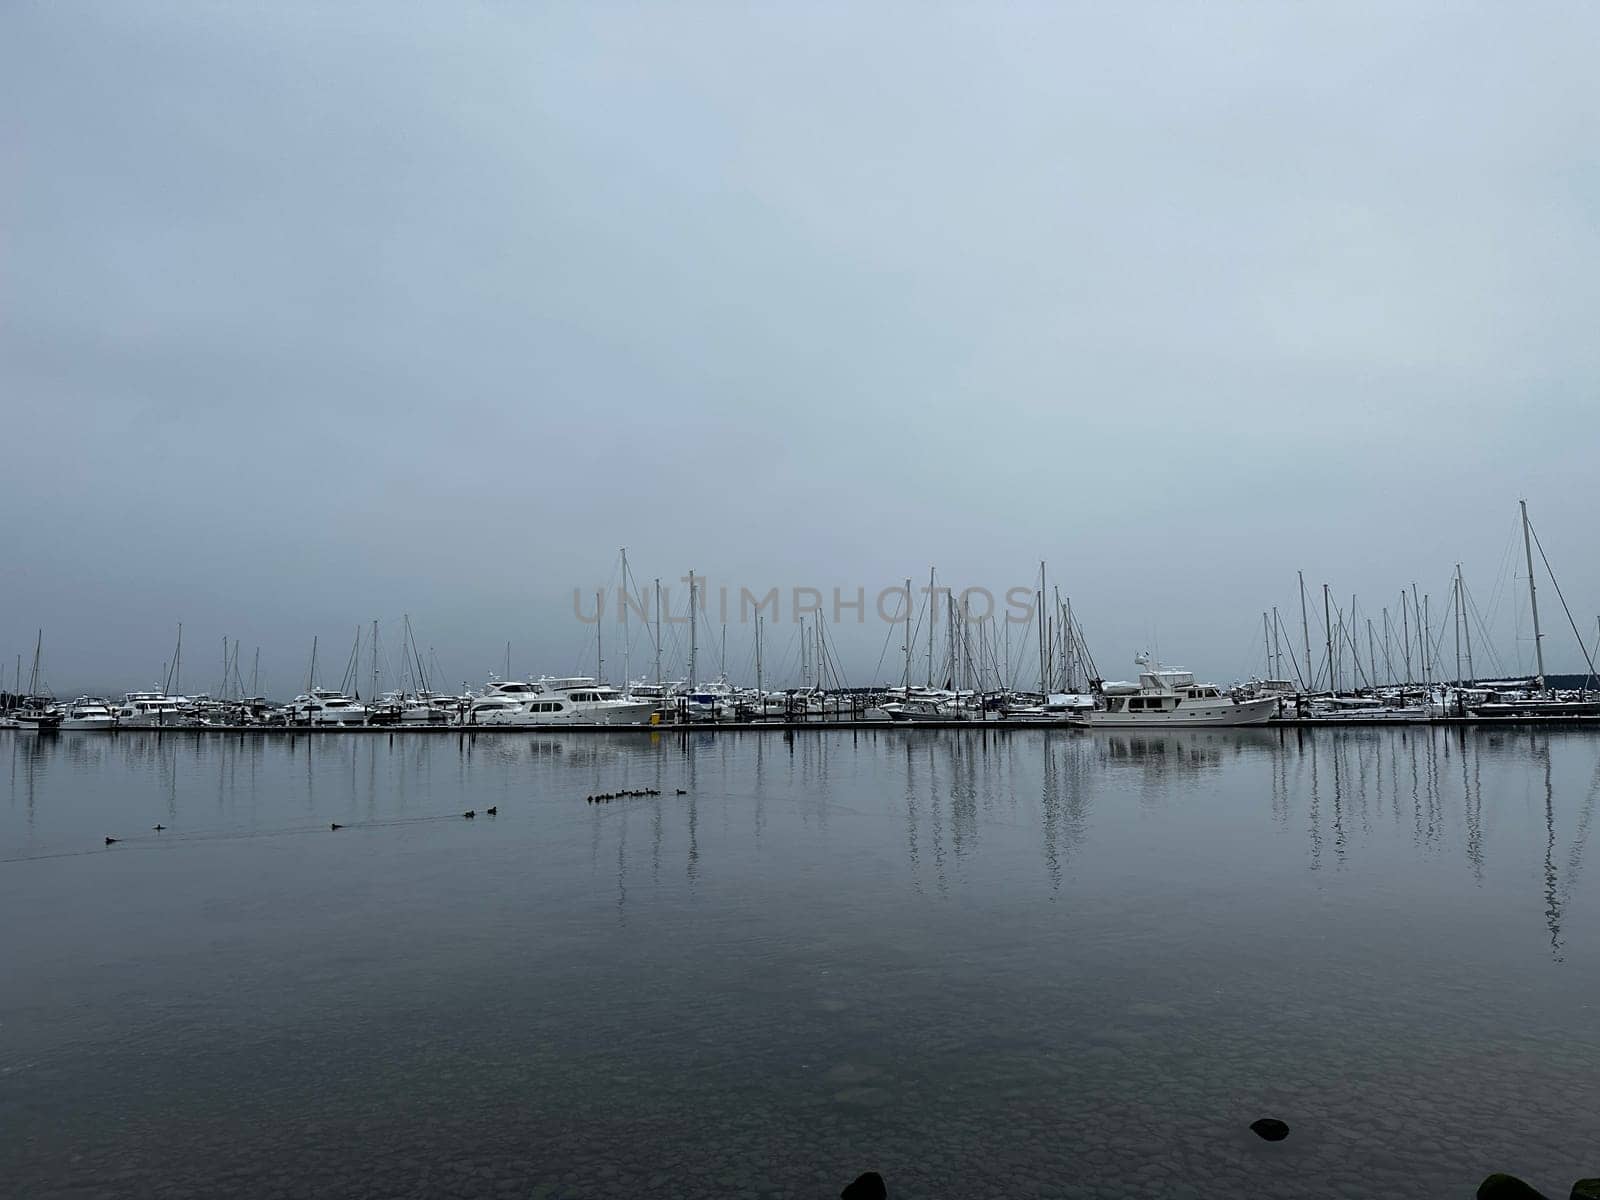 Sailboat reflections at Port Sidney Marina on a dreary dark and overcast day by Granchinho